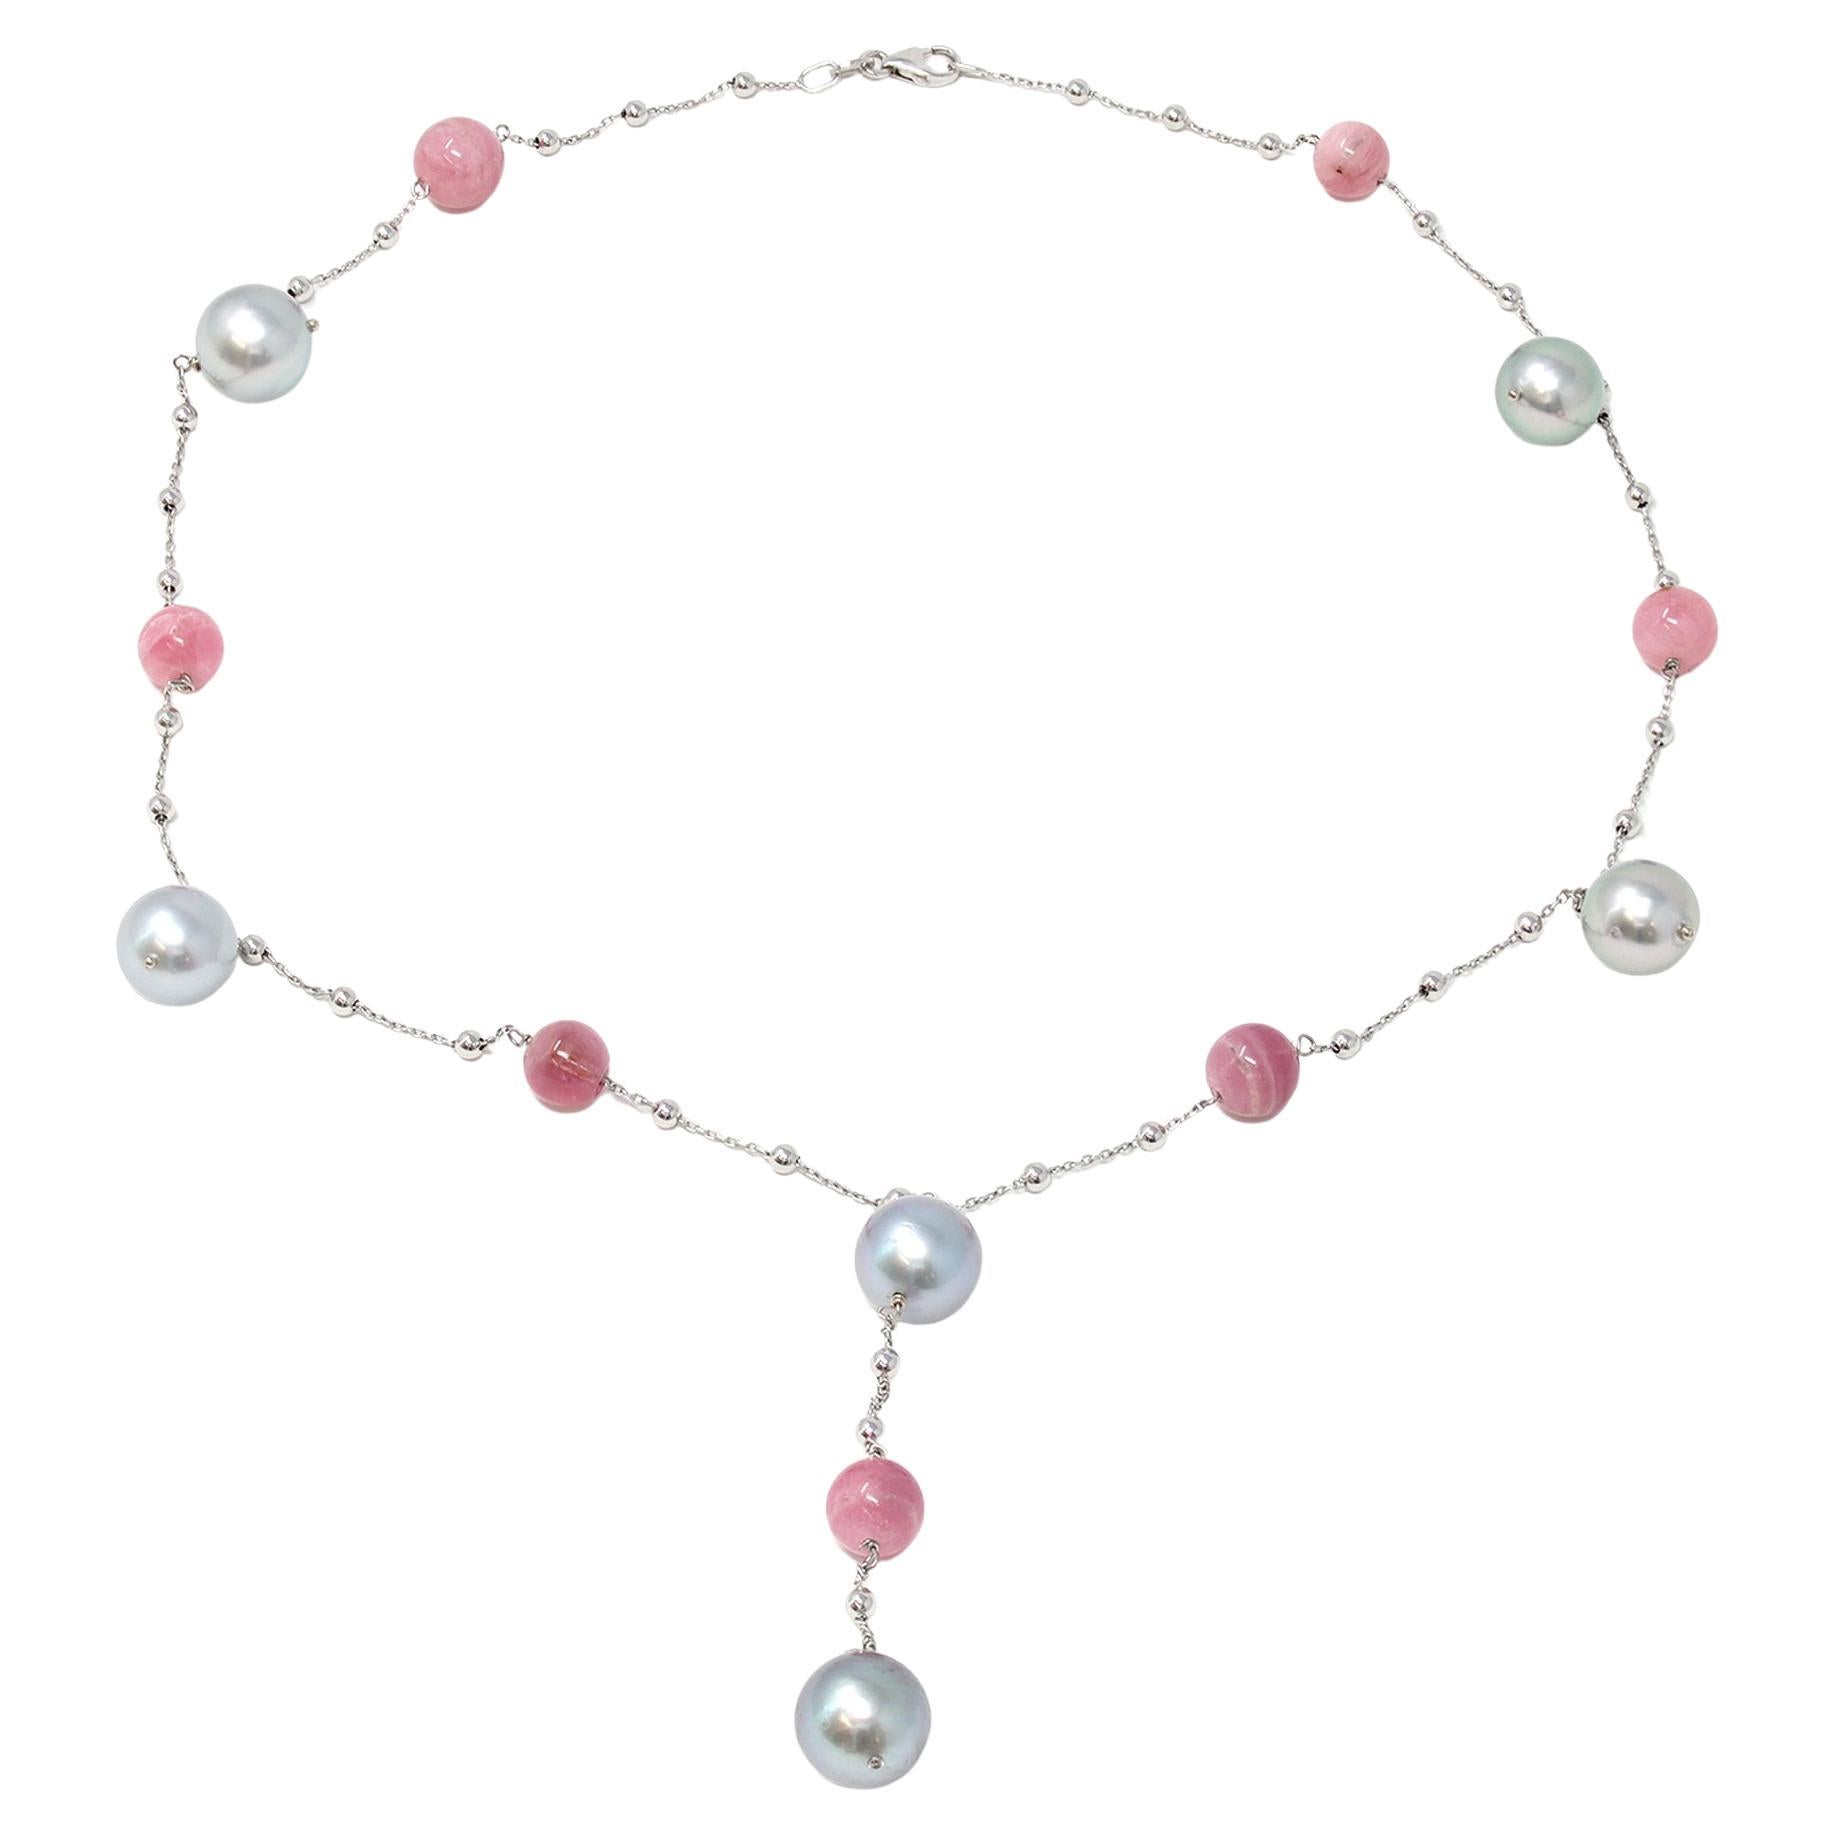 Rosaria Varra Tahitian Pearl and Pink Tourmaline Bead Station Necklace in 18k For Sale